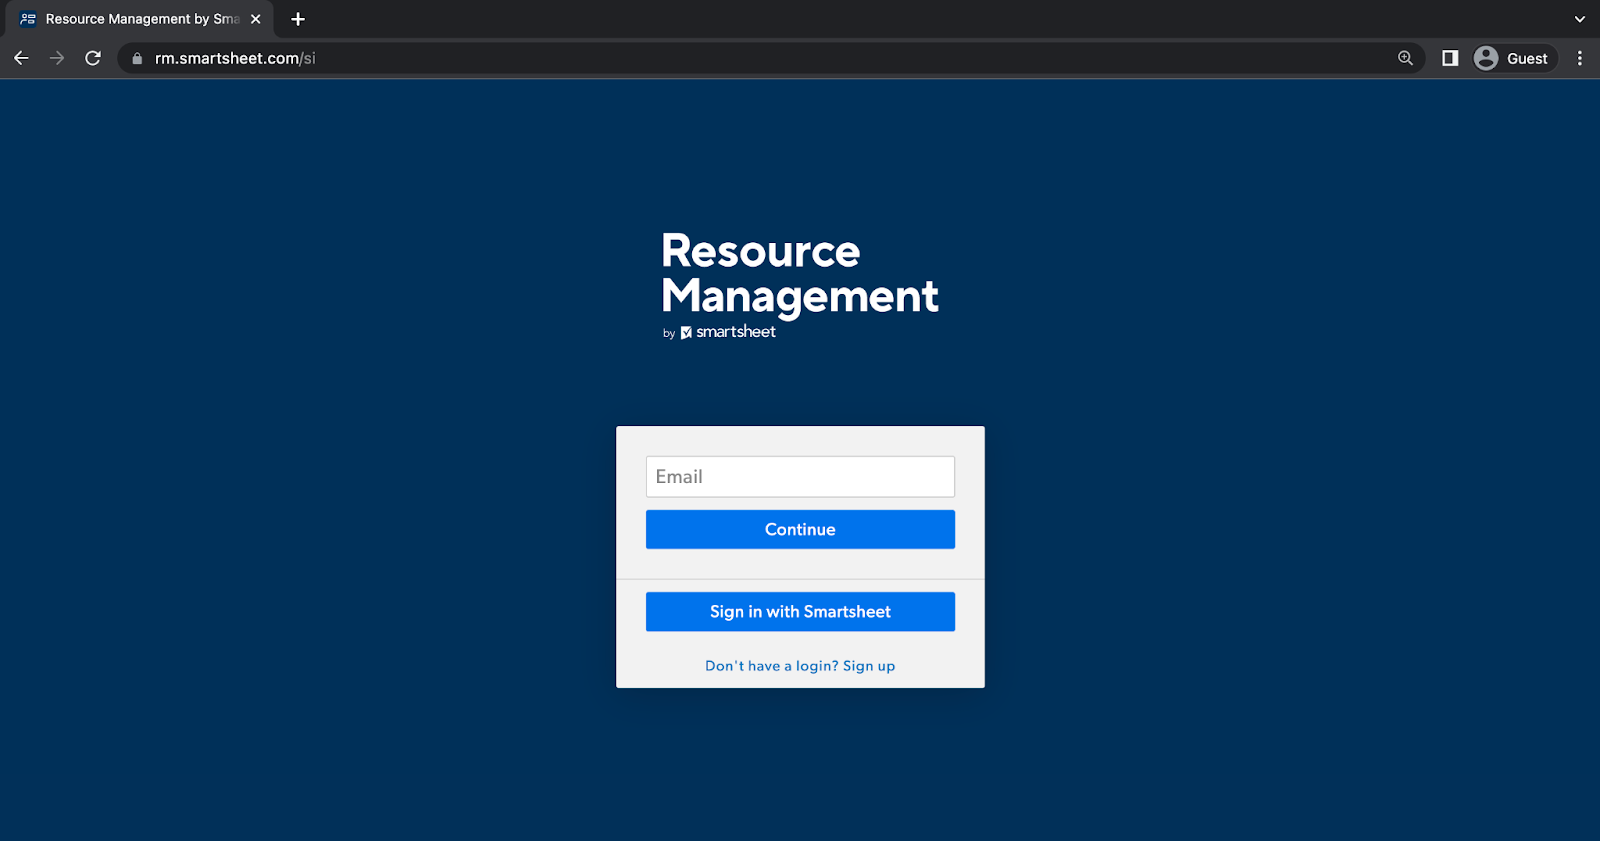 Sign in with Smartsheet for Resource Management